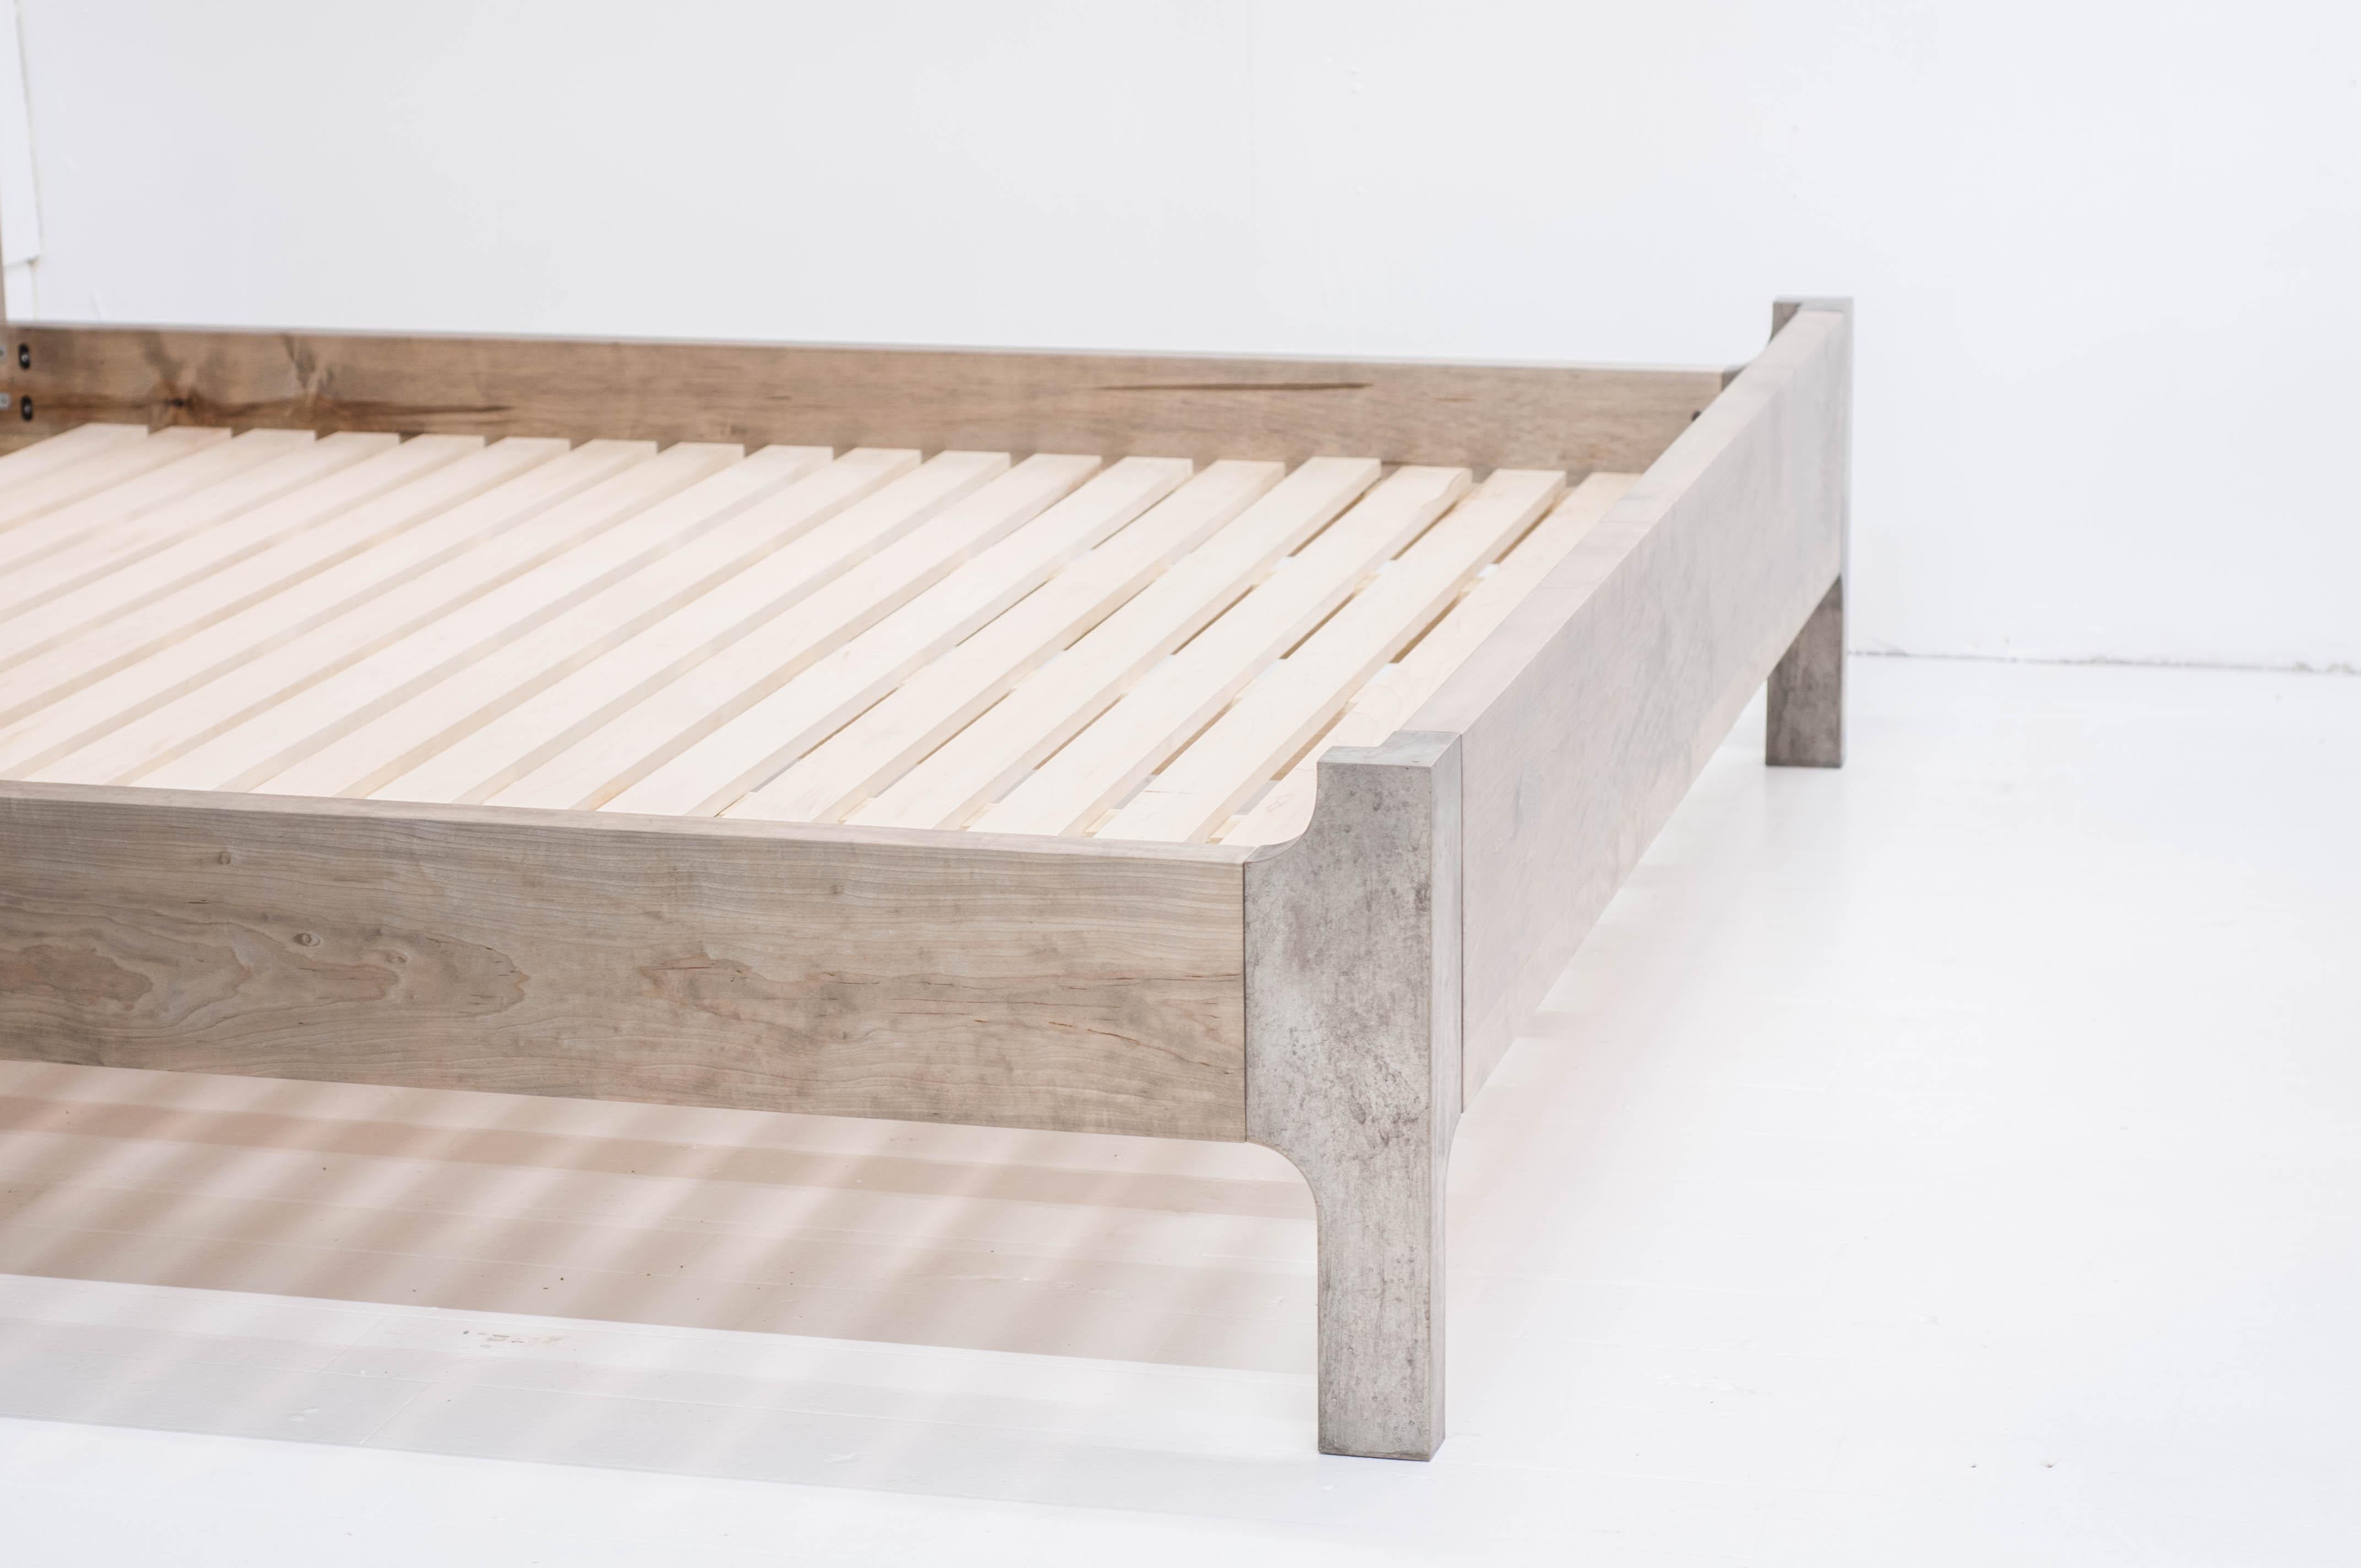 Goby bed is a bed in the shaker body of work from the studio at Jeff Martin Joinery. Experimenting further with the interface between materials, the design is hinged on centuries old draw-bore bed frame construction. But performed in cast